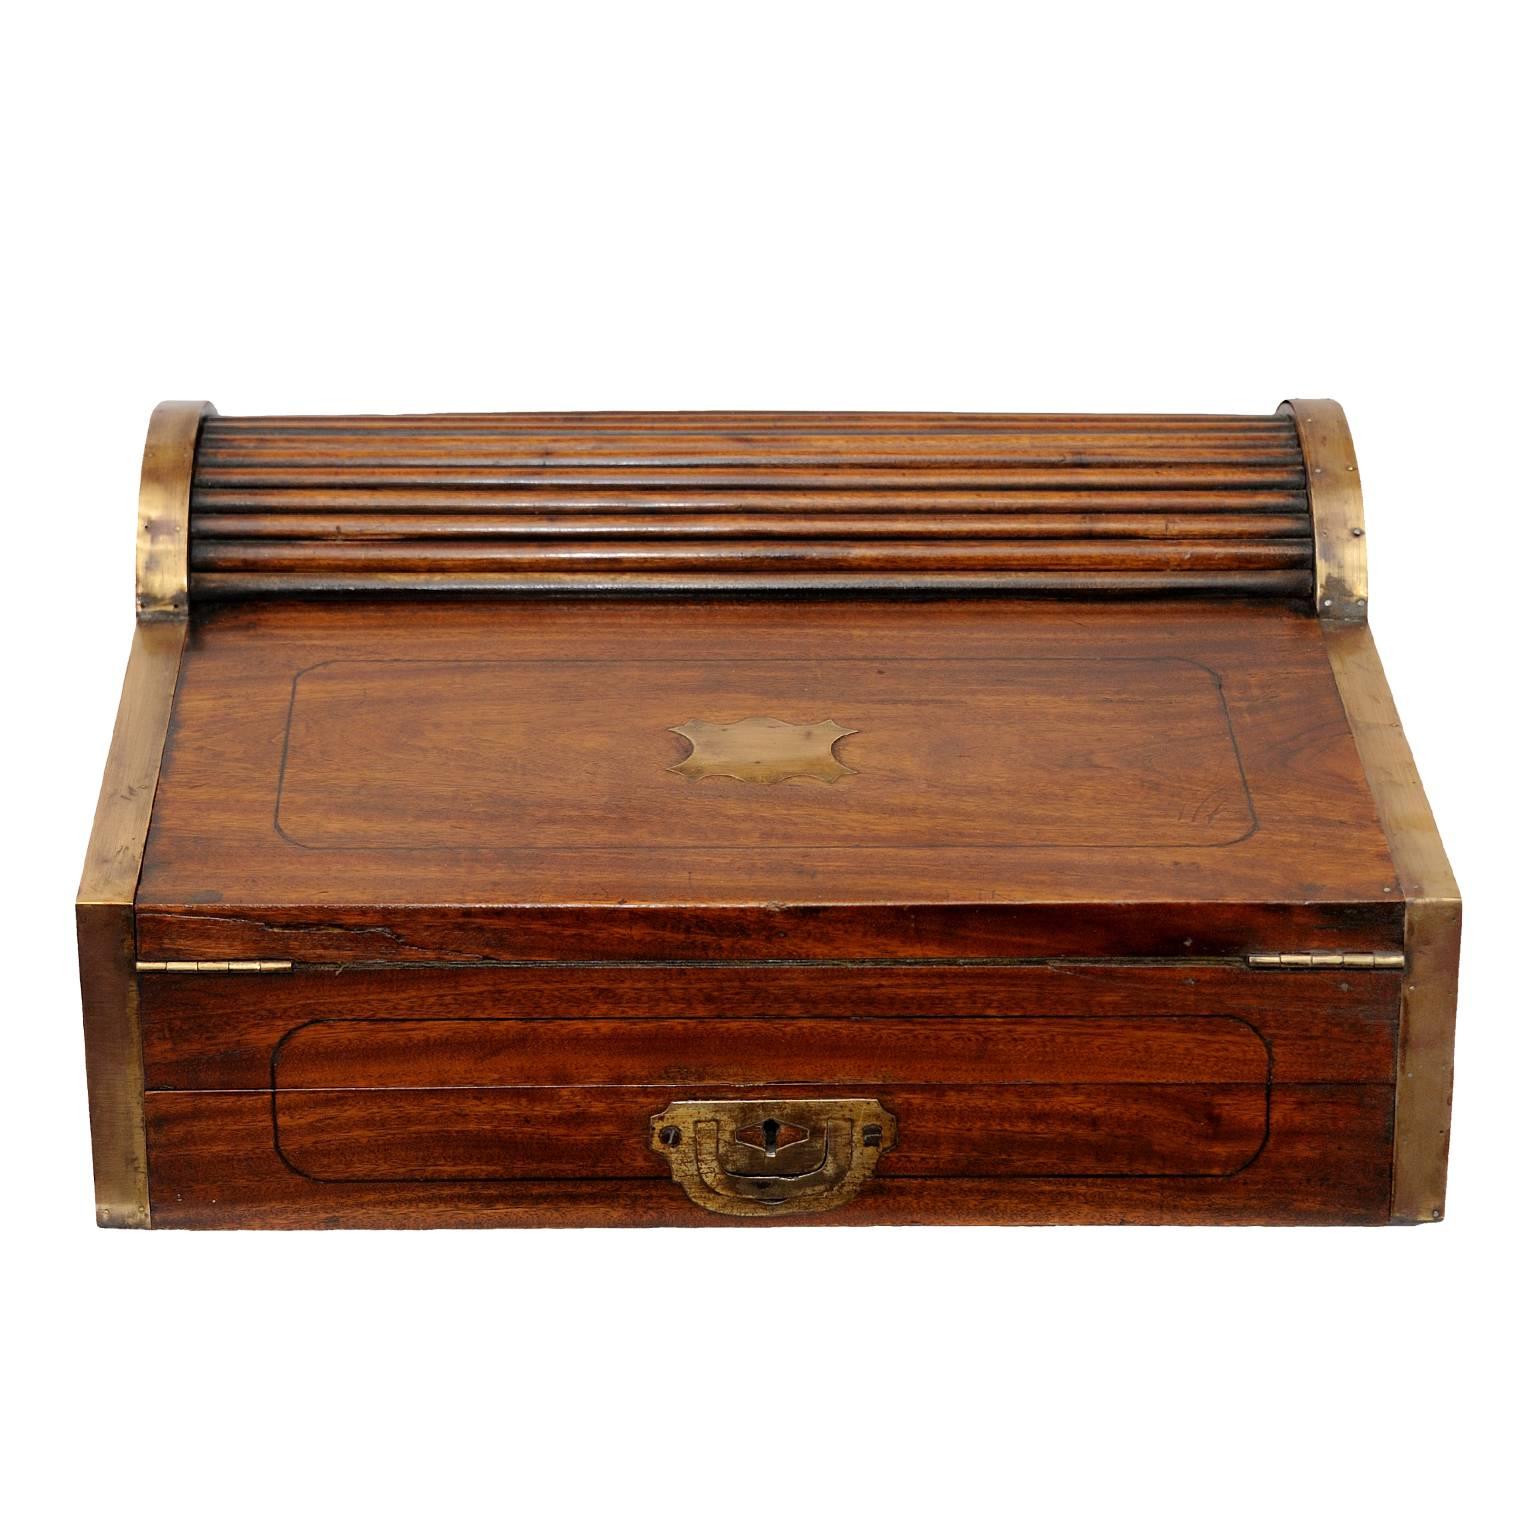 This is a lovely and early example of a 19th century Anglo Chinese camphor wood Writing Slope with automatic handle action, made for the European market, circa 1820. 

Examples of these can be seen in the Peabody Essex Museum at Salem and in the